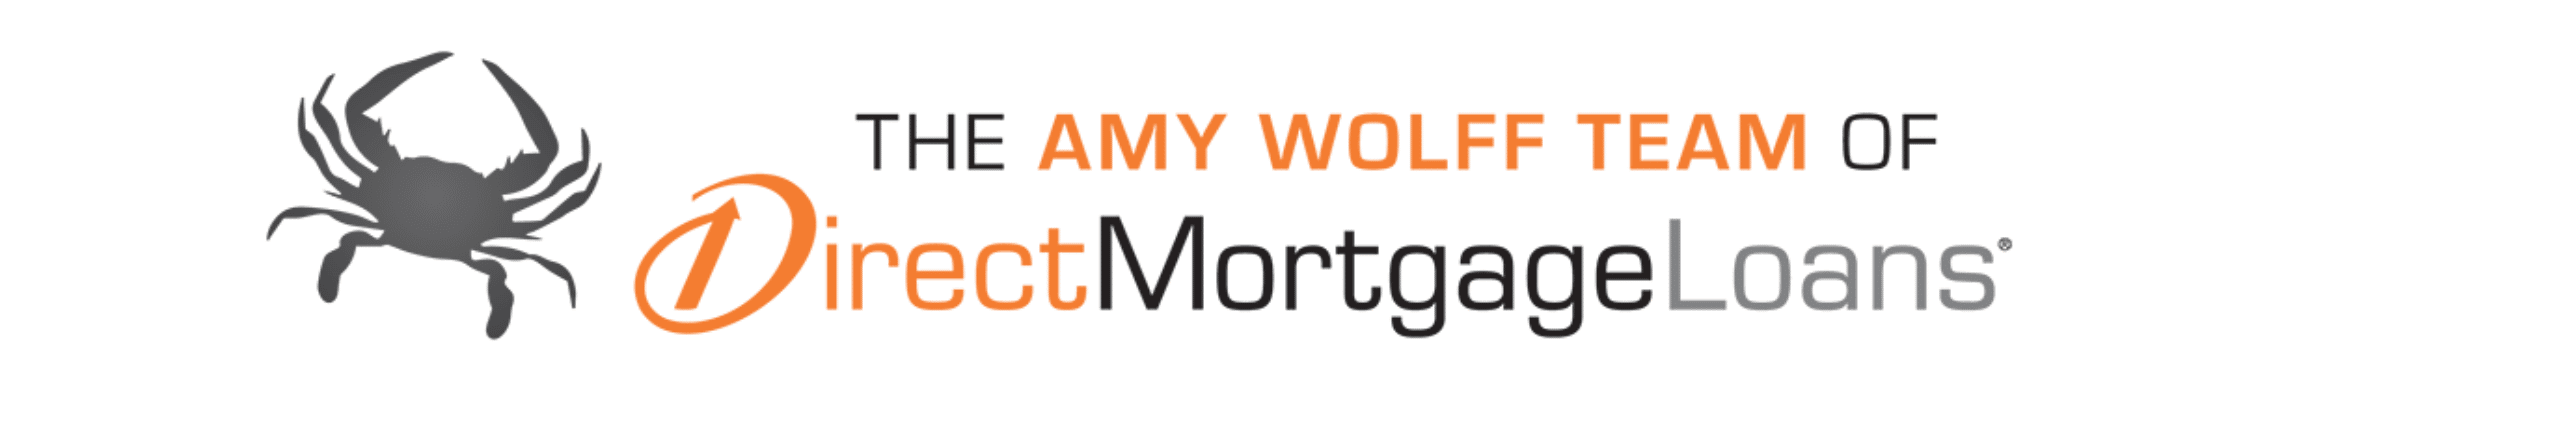 Amy Wolff team of direct mortgage loans logo